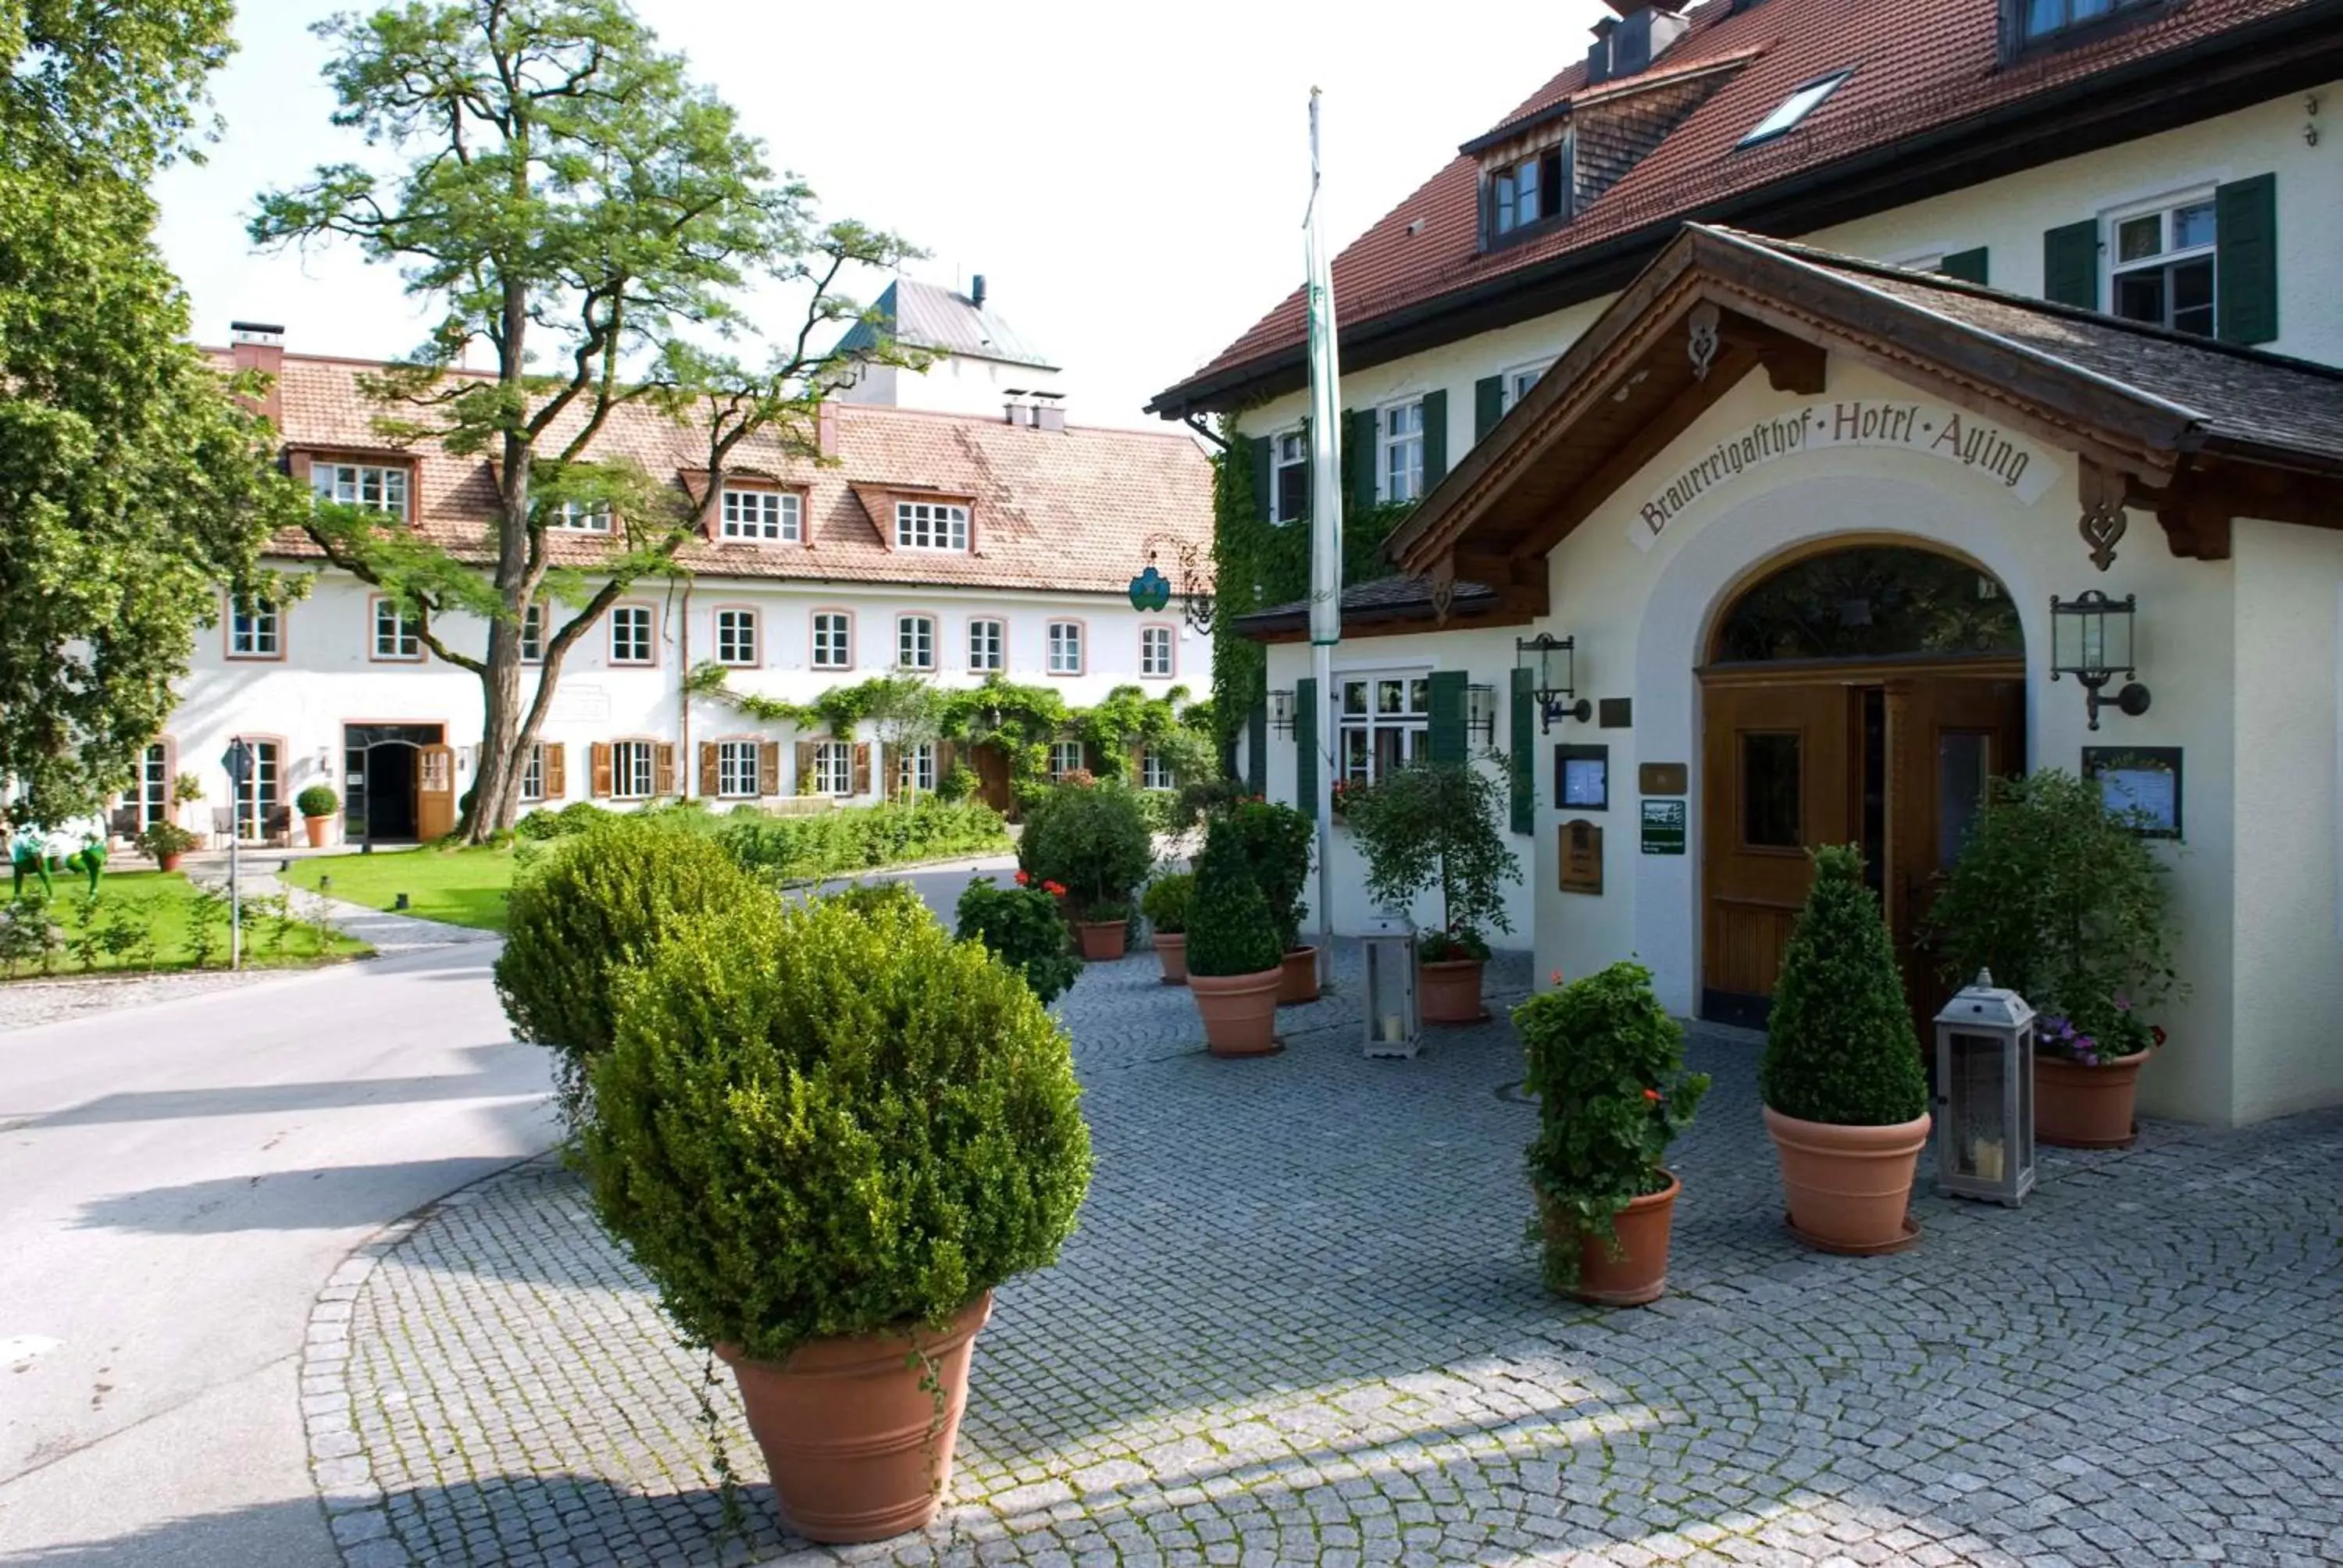 Facade/entrance, Property Building in Brauereigasthof-Hotel Aying